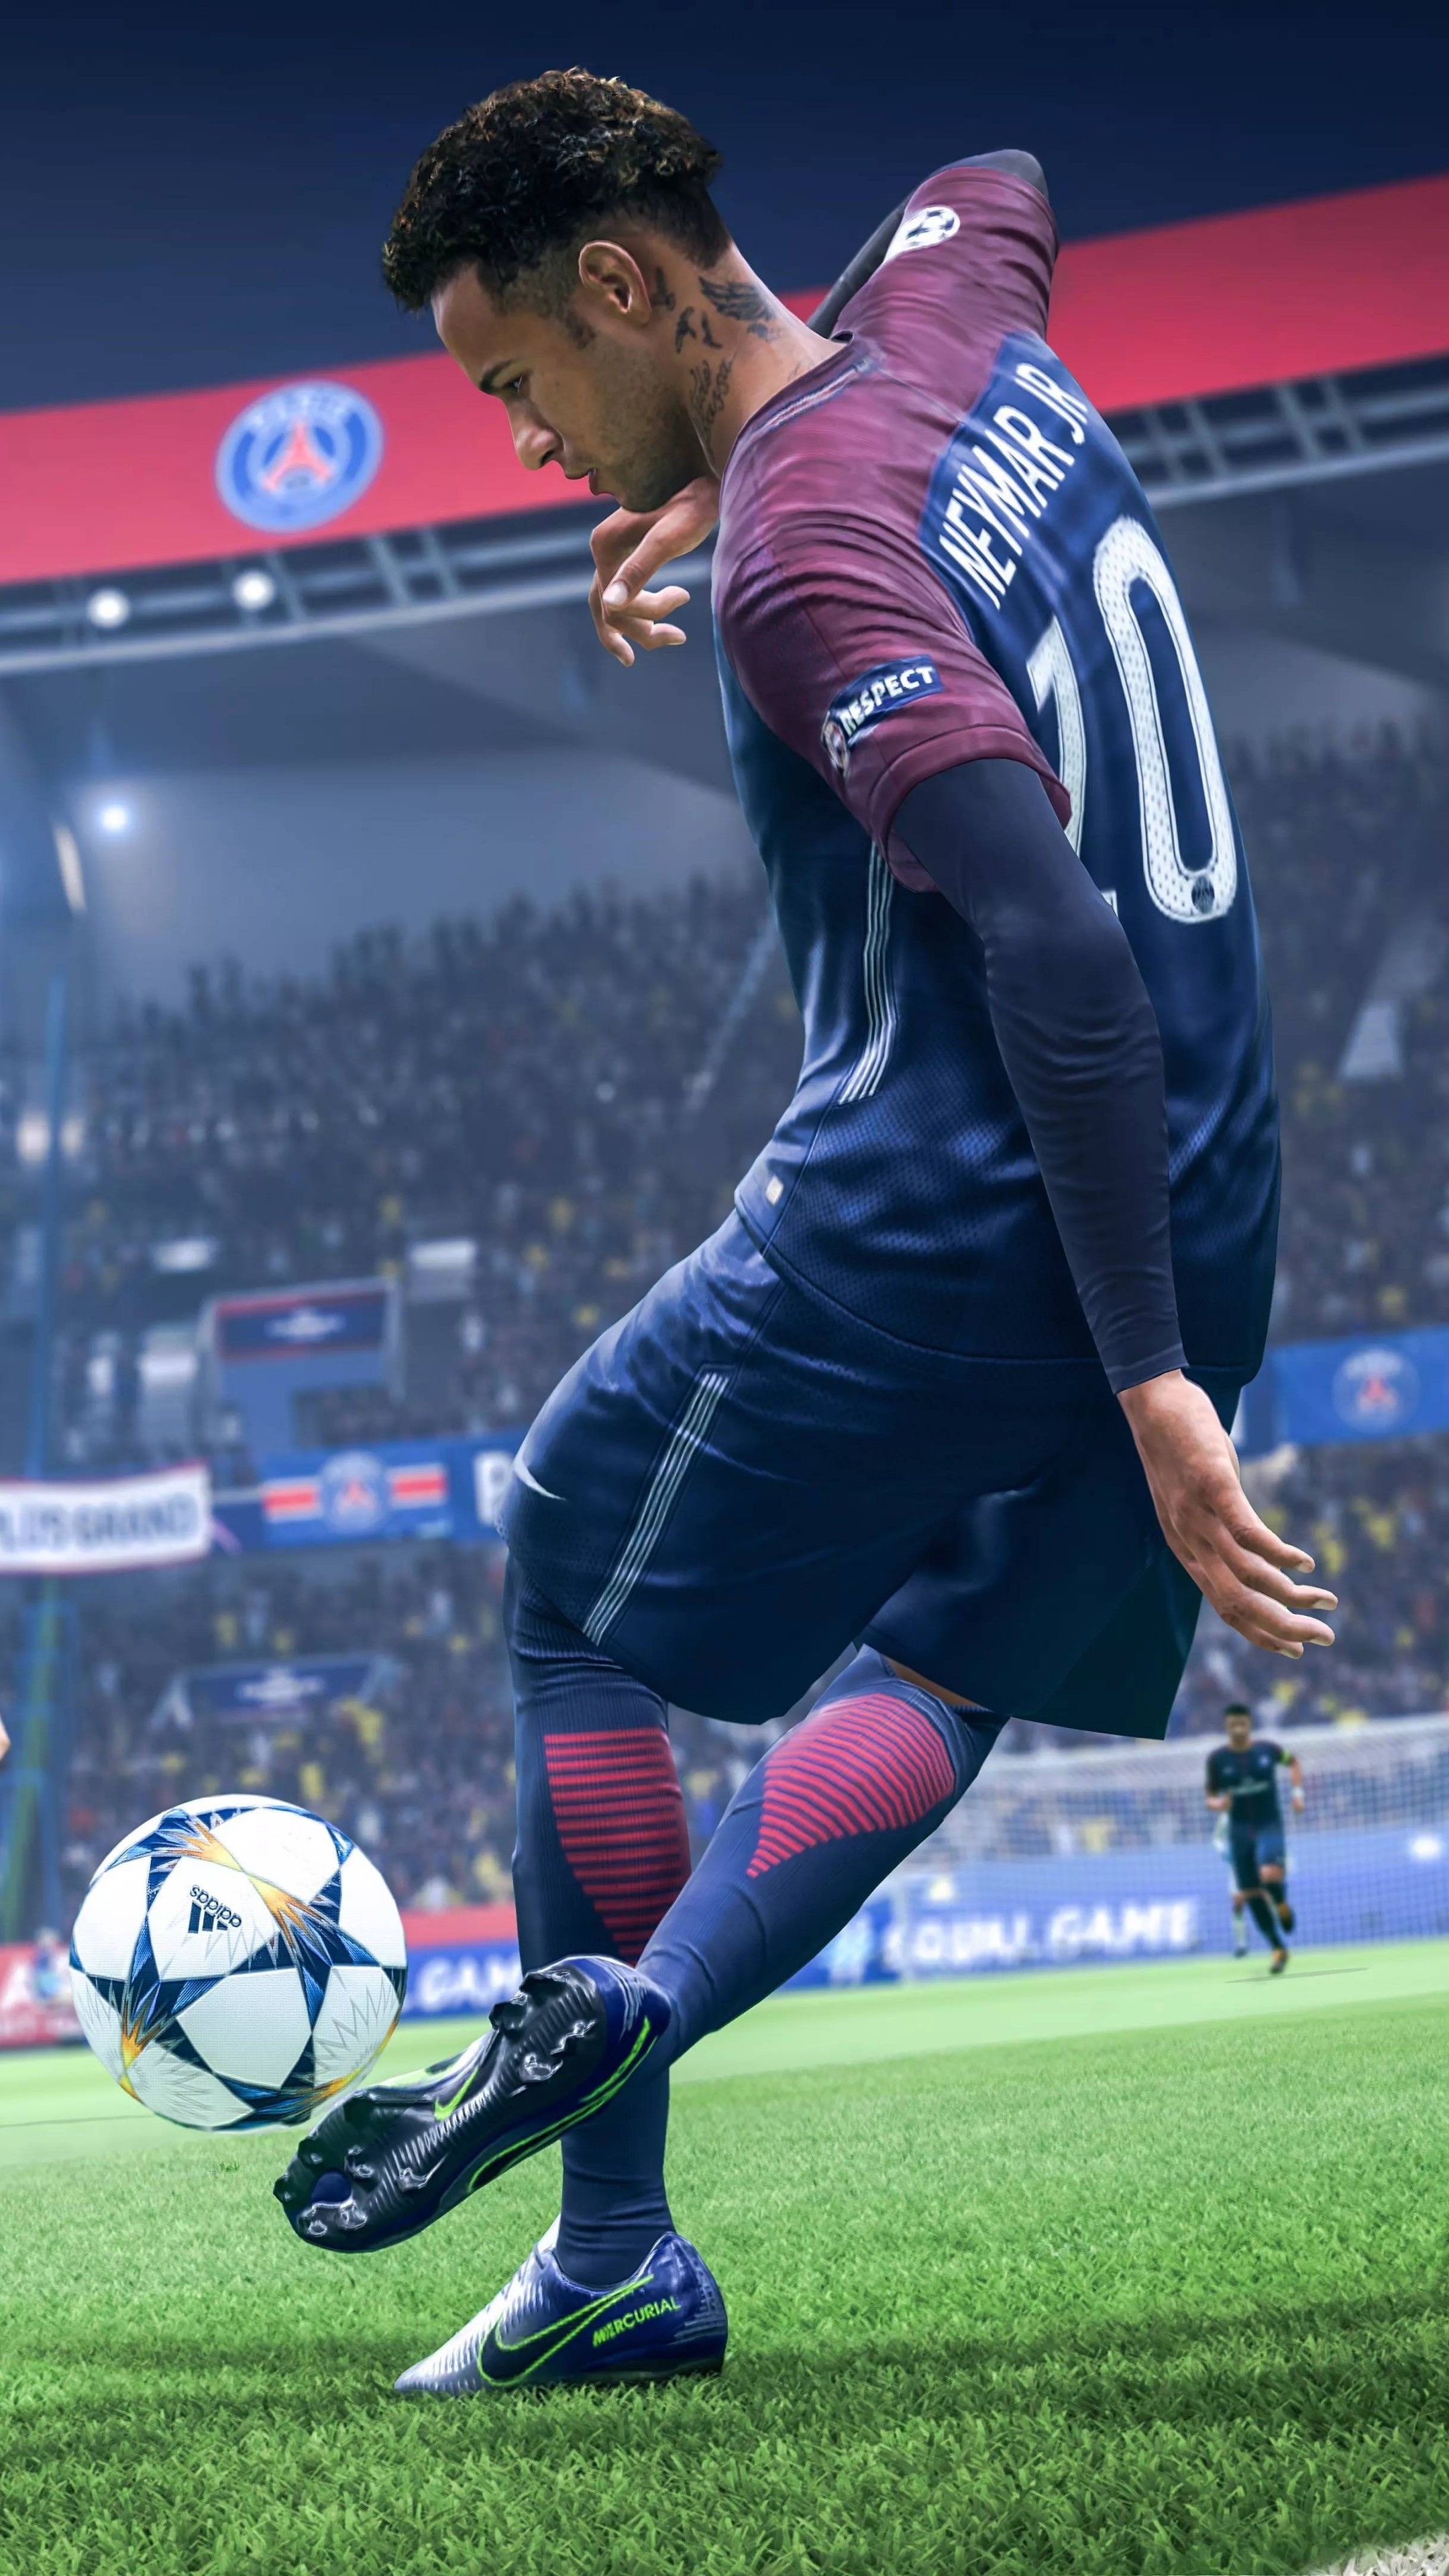 FIFA gaming championships, Epic sports moments, Dynamic gameplay, Crowd cheering, 2160x3840 4K Phone